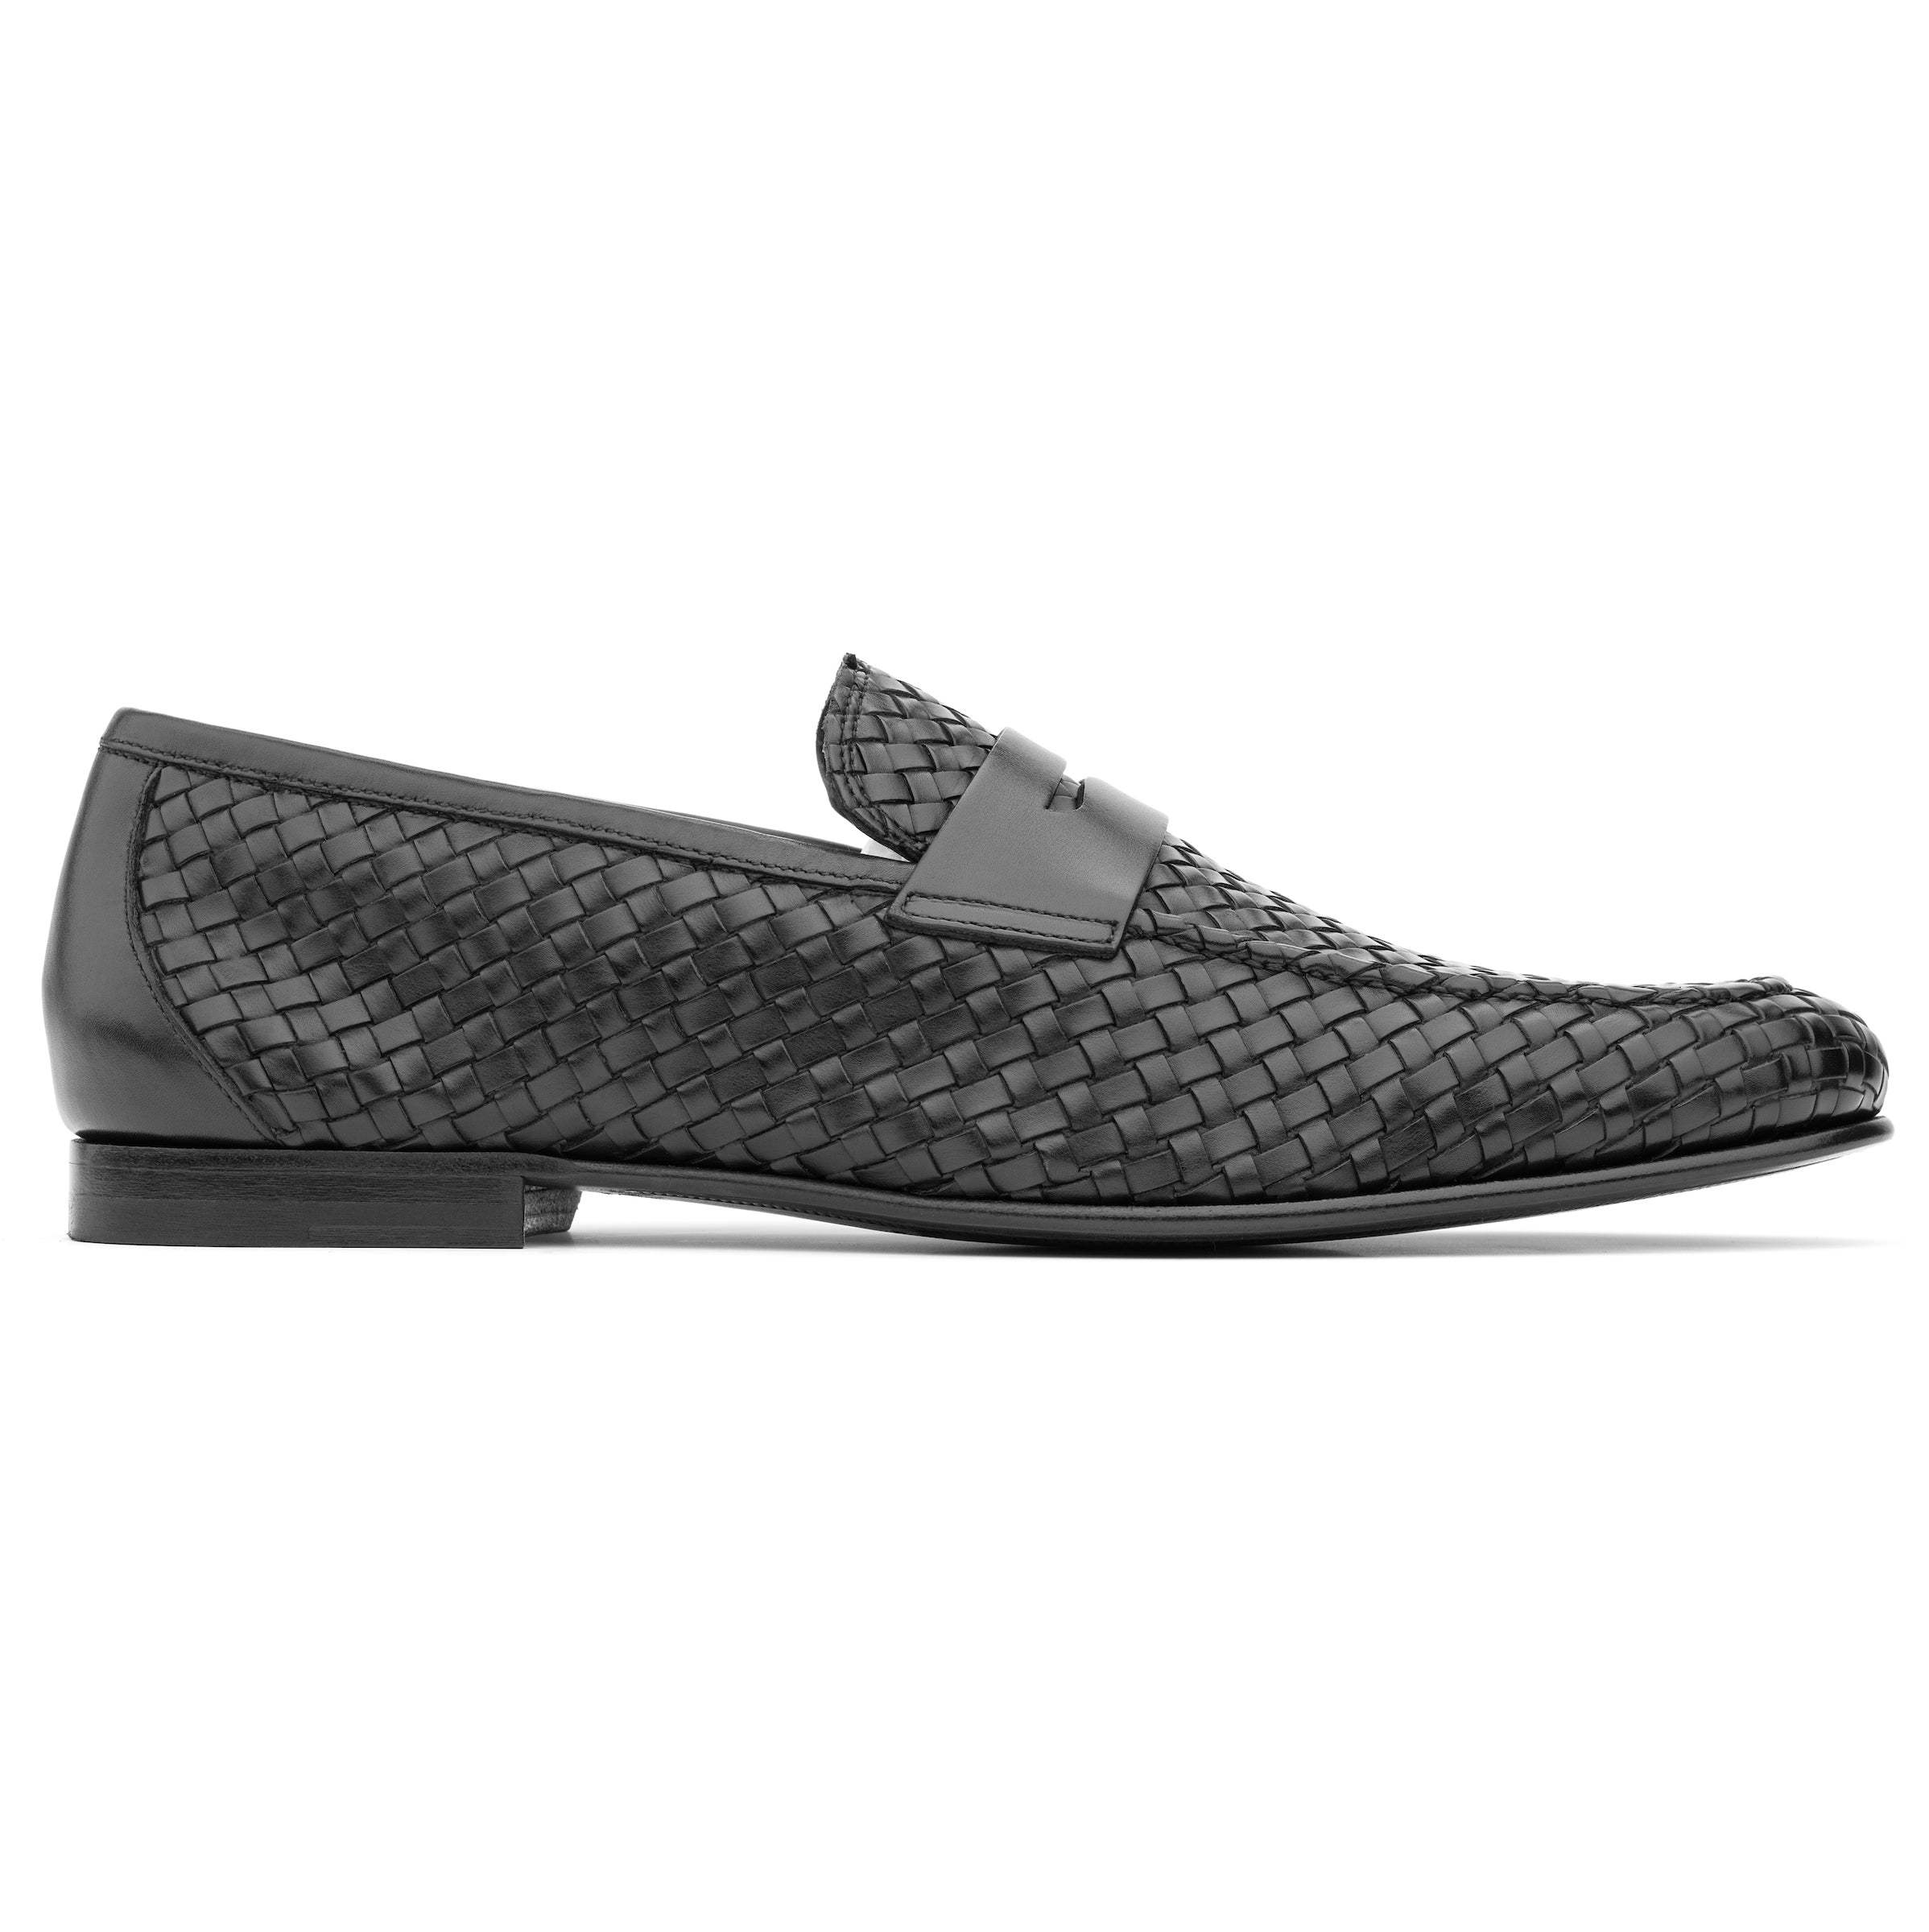 Zenith Black Woven Leather Loafer